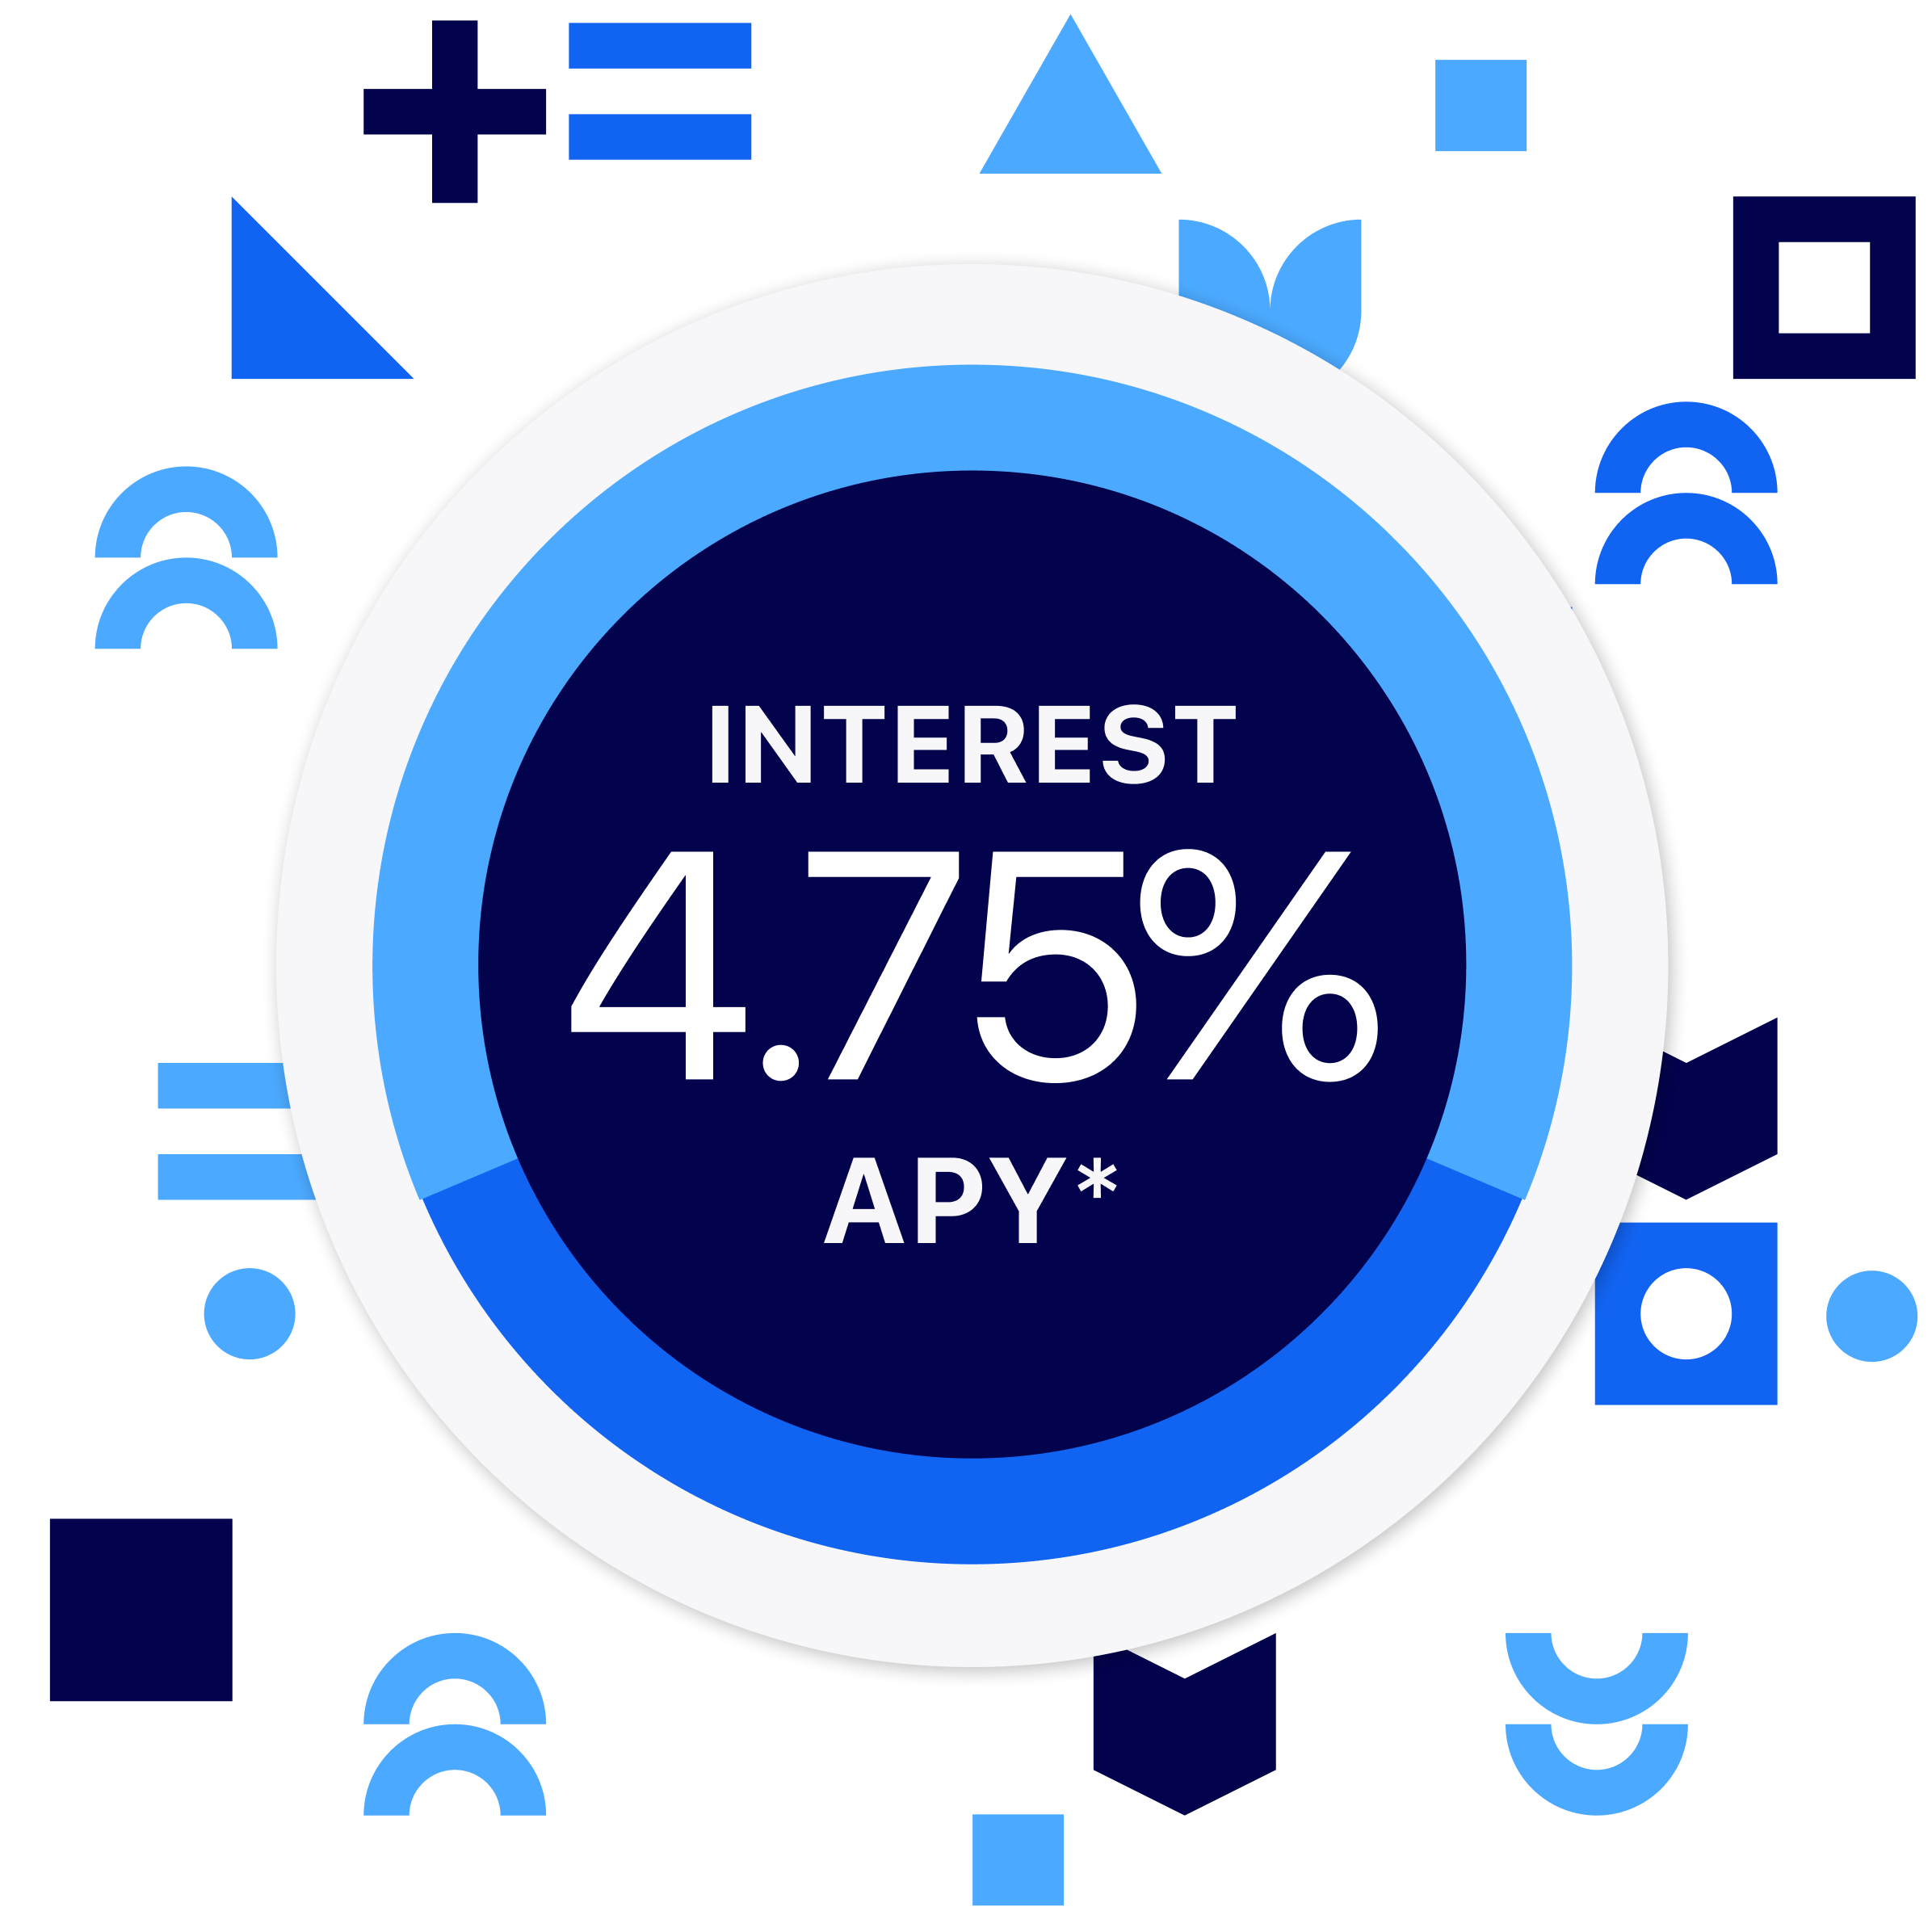 4.75 APY interest and phone app